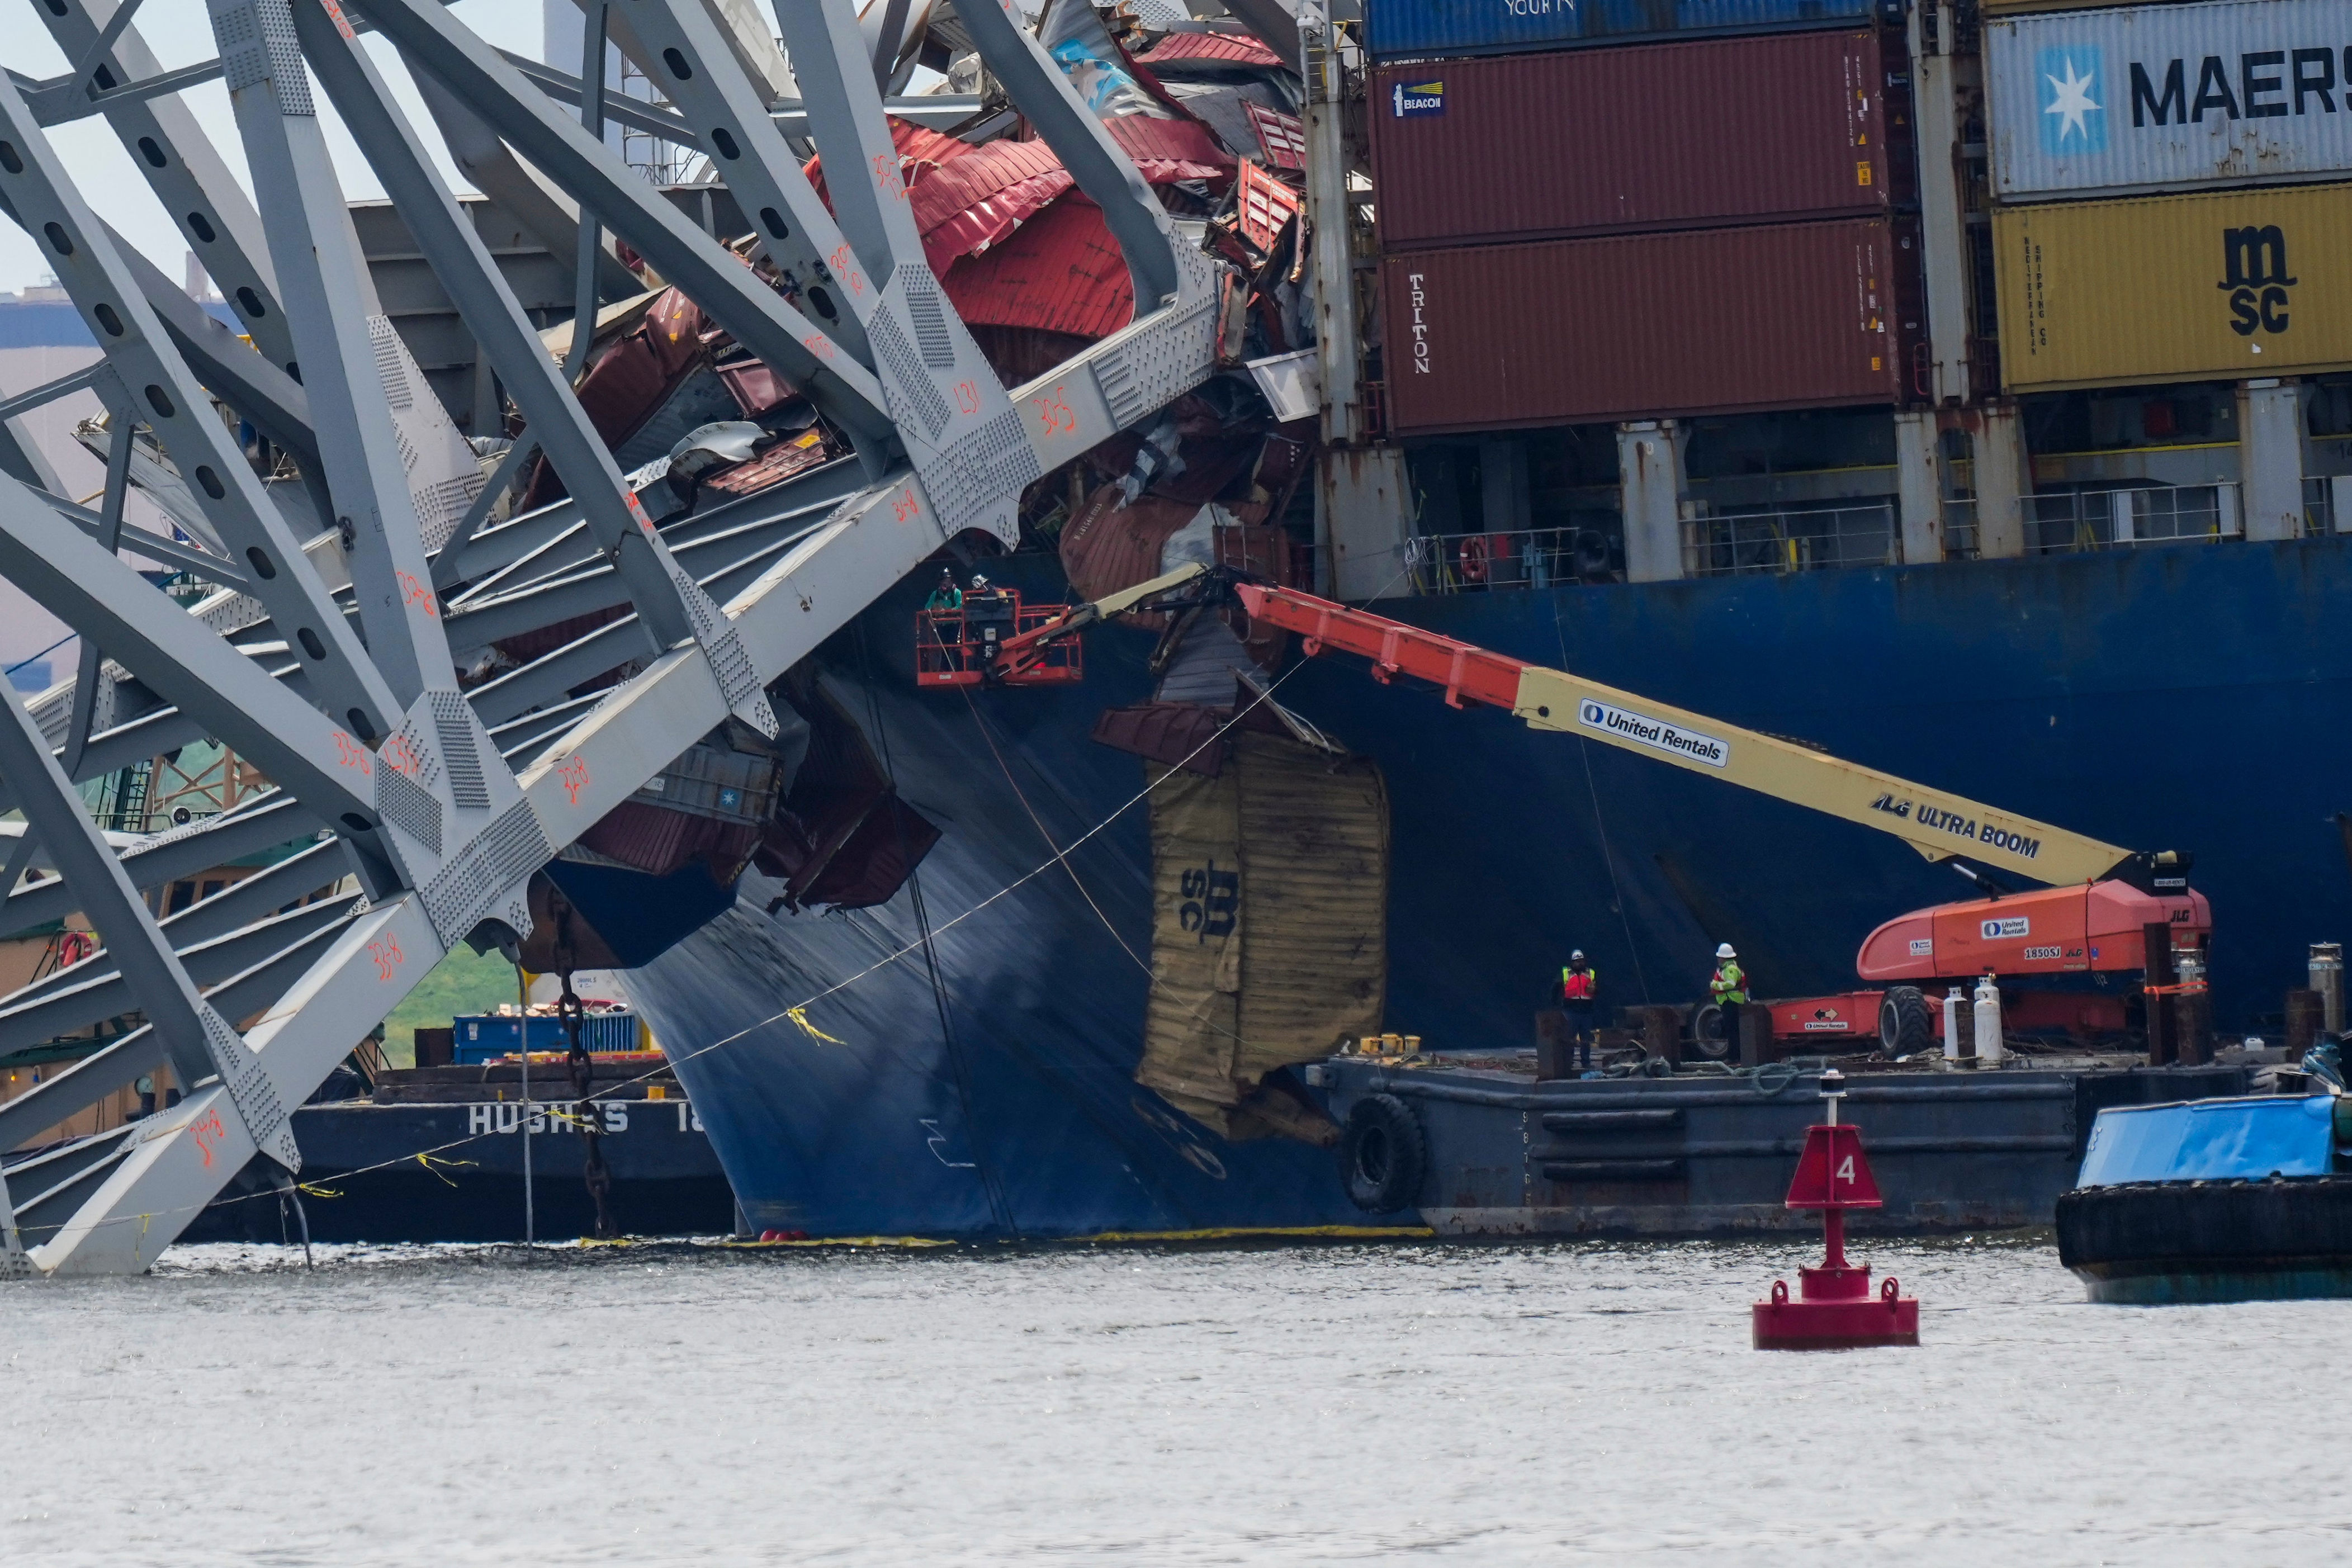 body of fifth baltimore bridge collapse victim is pulled from wreckage 37 days after disaster